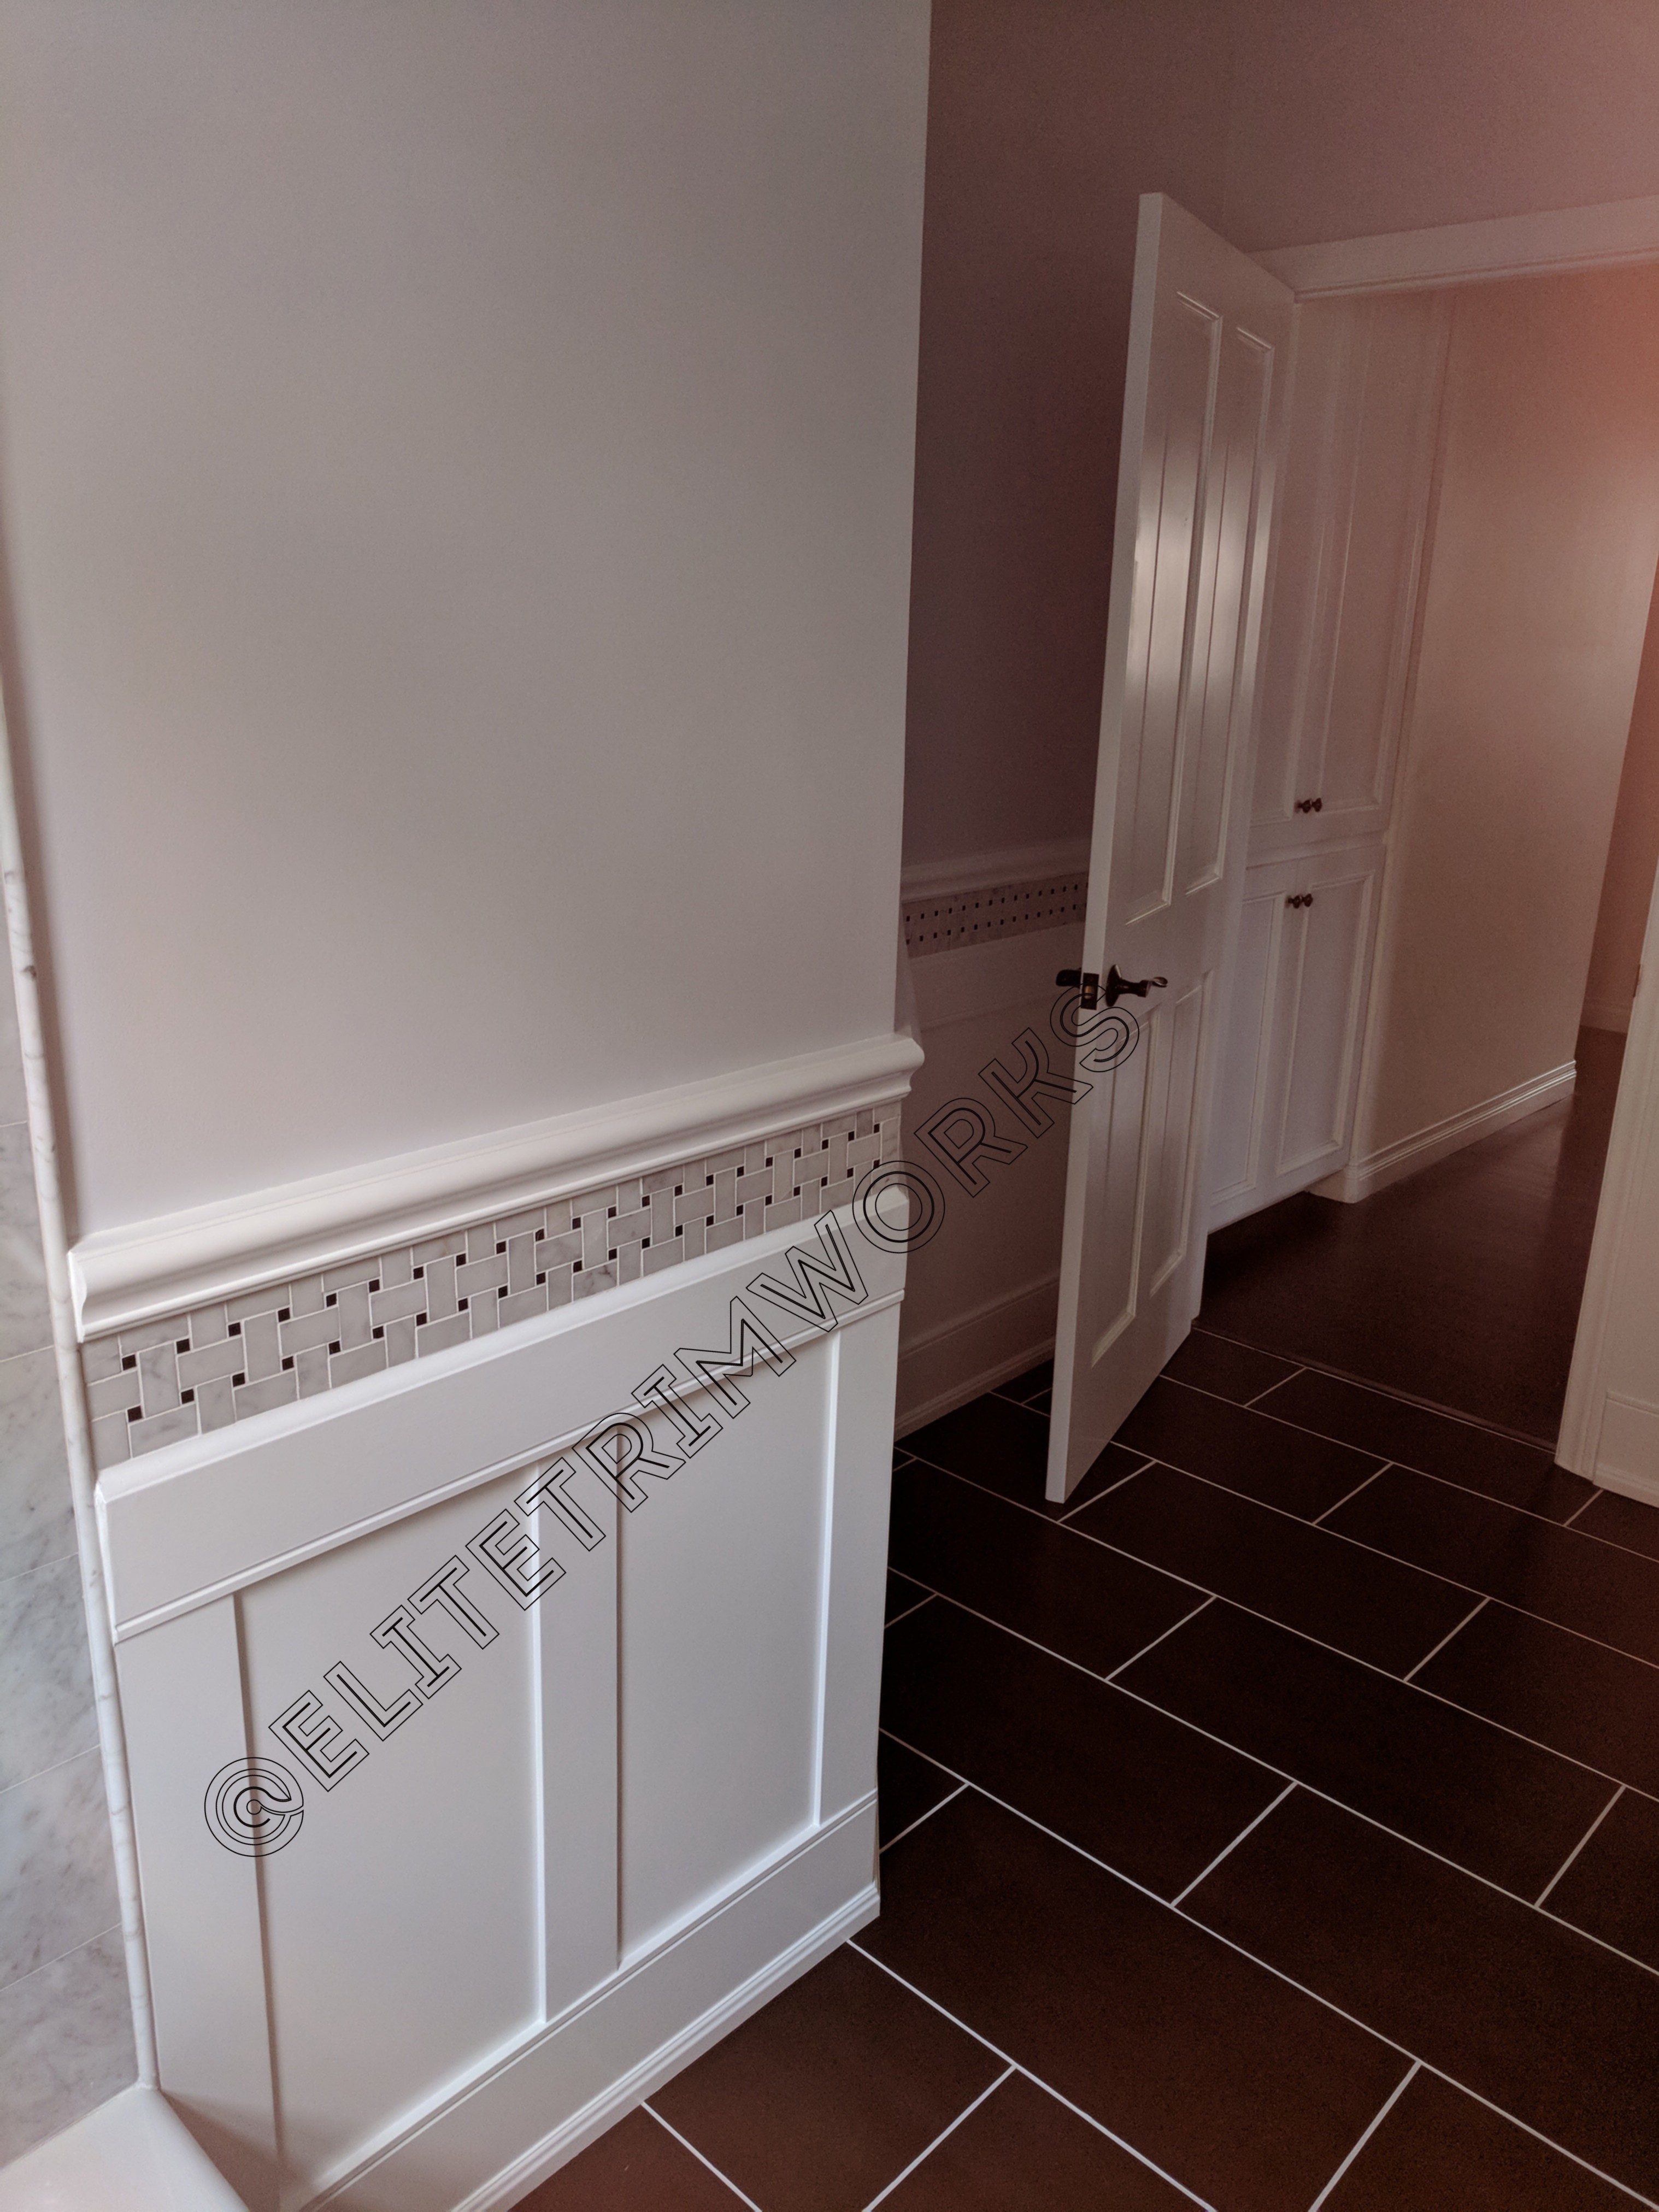 Tile and Wainscoting a Lovely Combination – Elite Trimworks Blog